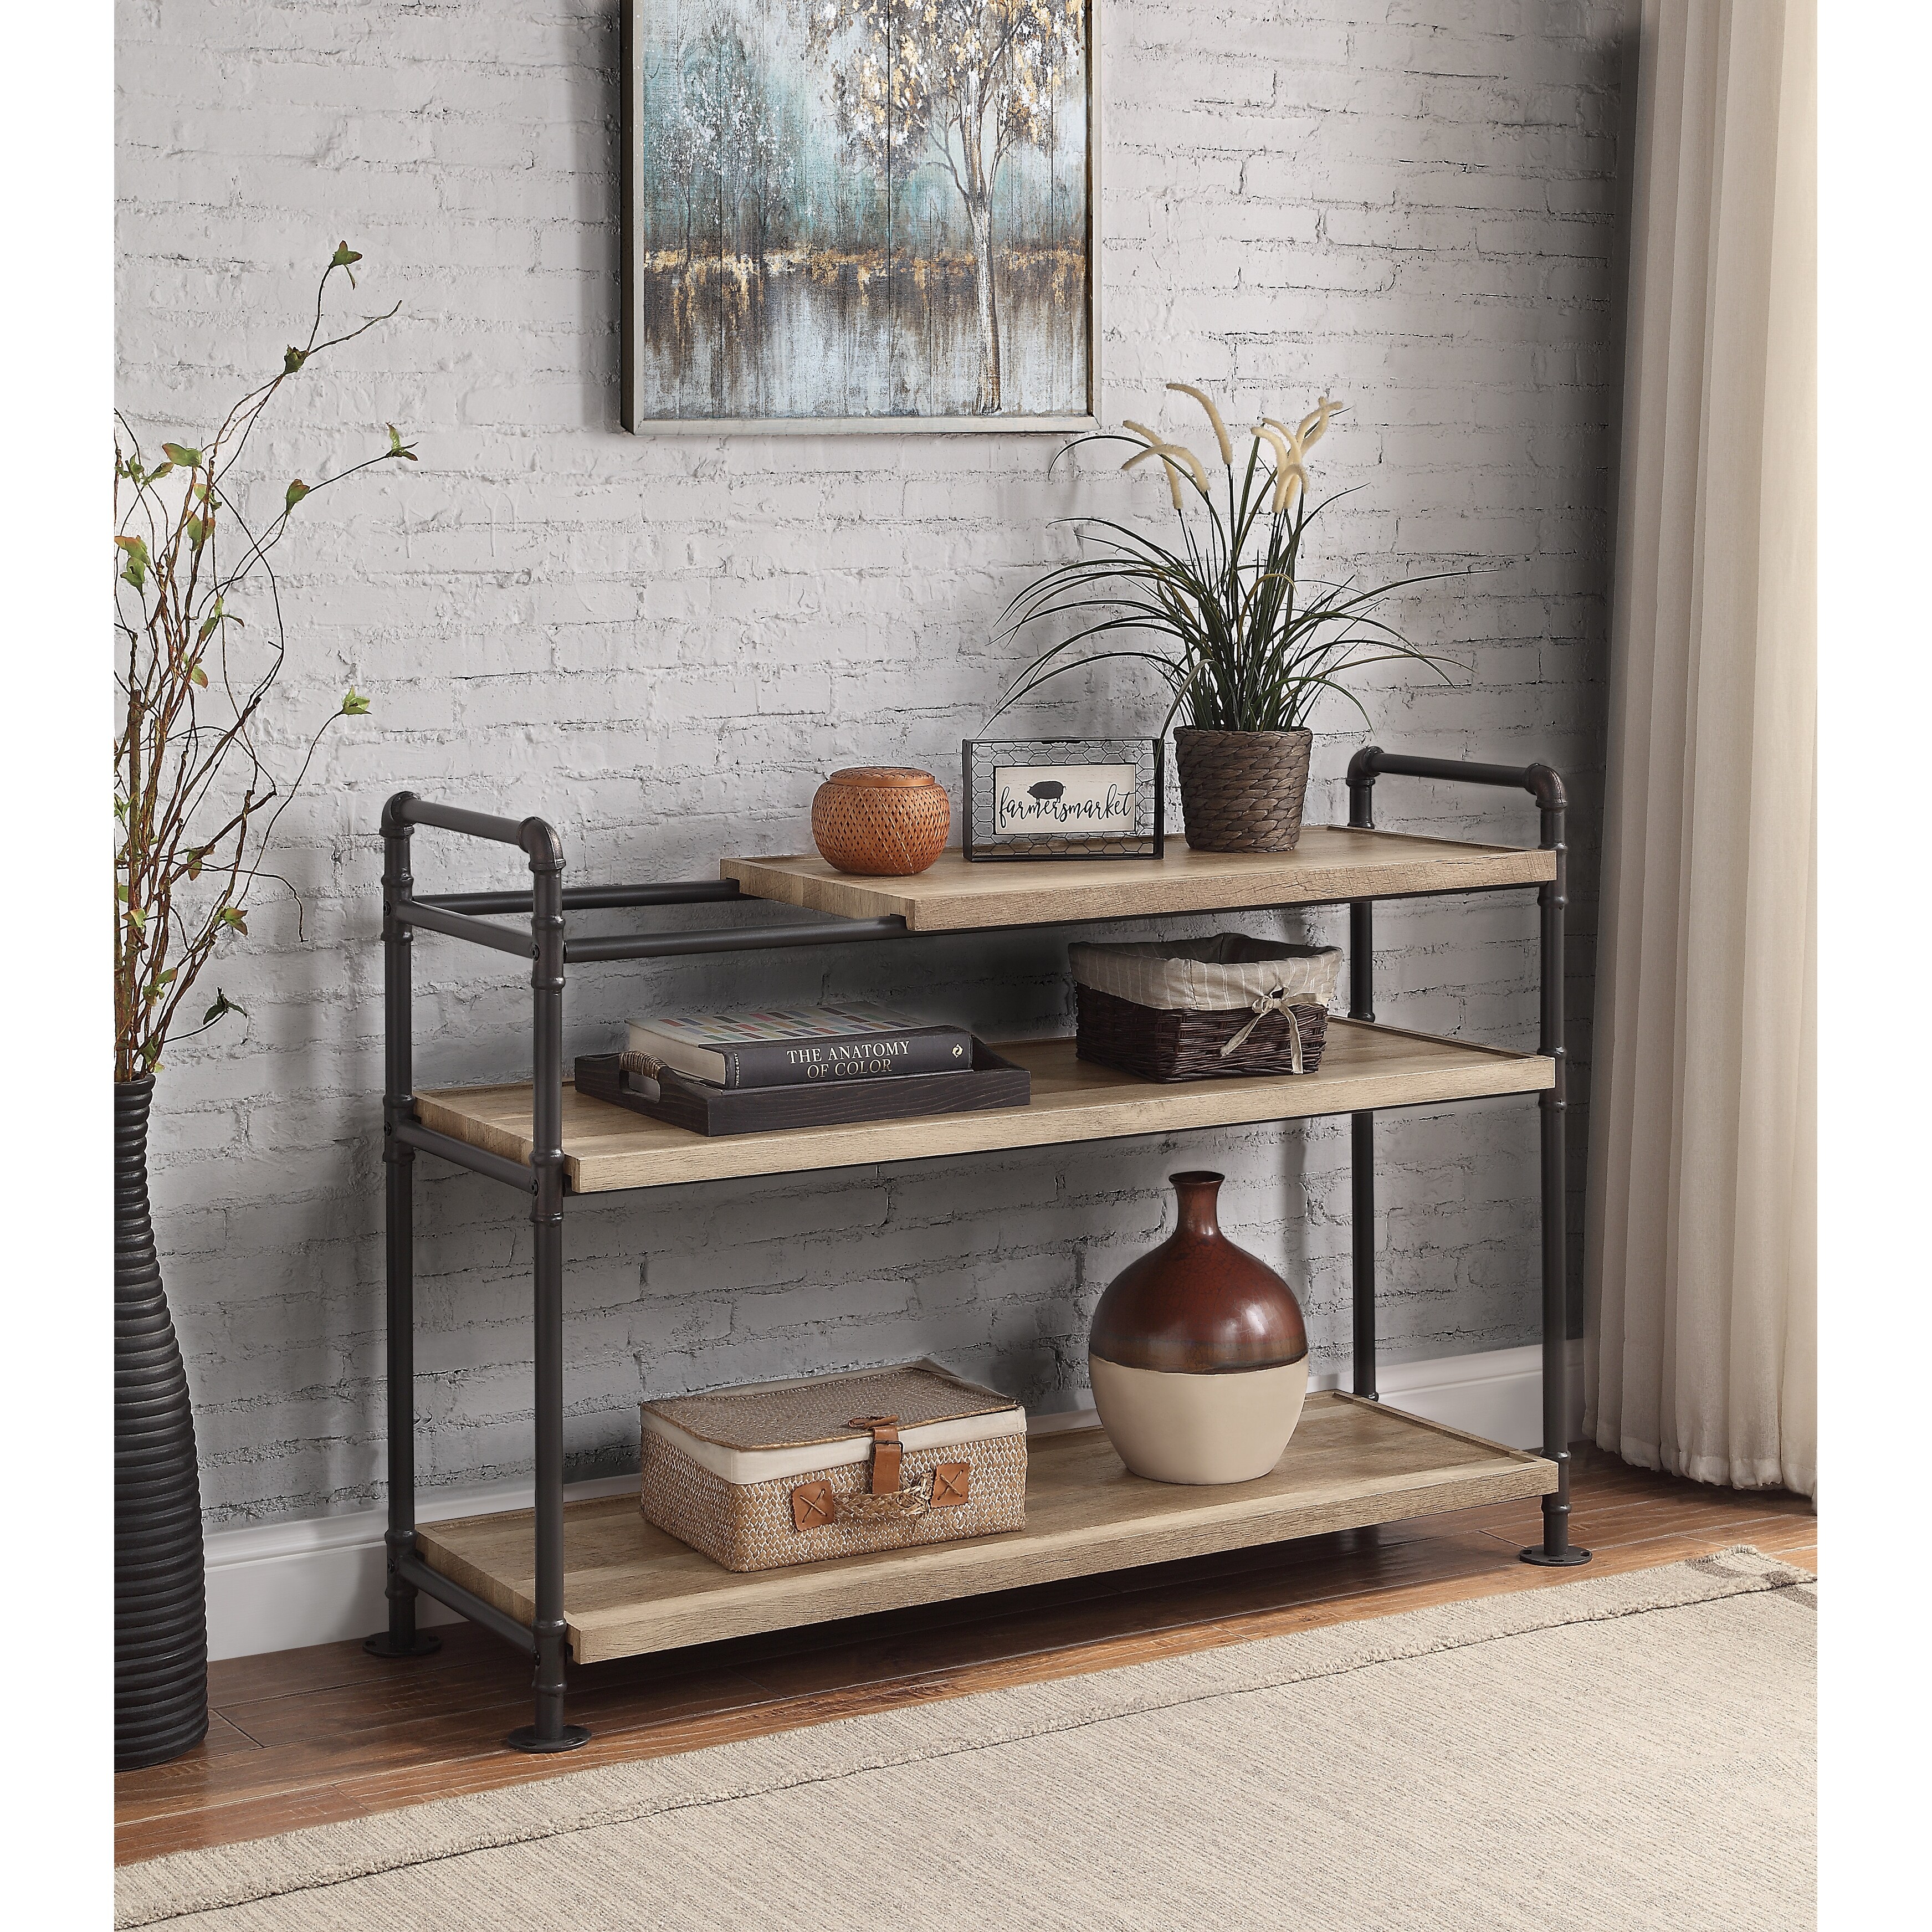 https://ak1.ostkcdn.com/images/products/is/images/direct/80619d692251cc85a451ac4e5d3a0043d7c5d2a9/Industrial-Style-Brantley-Metal-Frame-Bookshelf-Oak-%26-Sandy-Black-Finish%2C-with-Three-Open-Storage-Wood-Planks-for-Your-Office.jpg